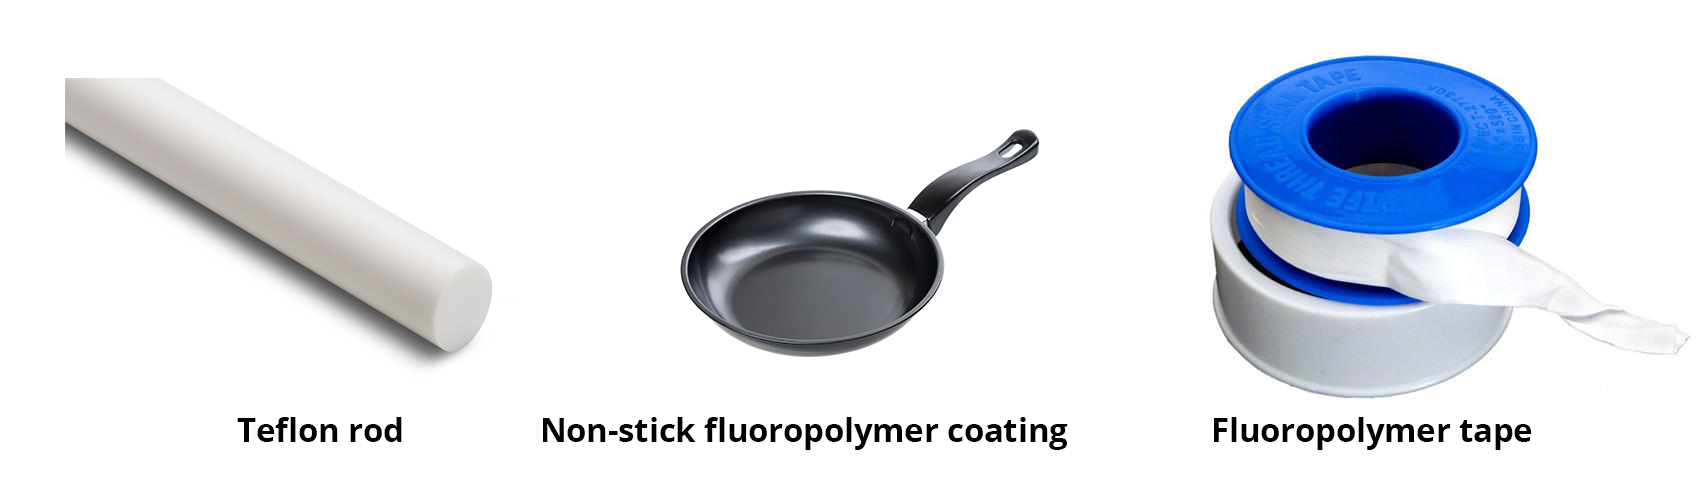 Fluopolymers applications